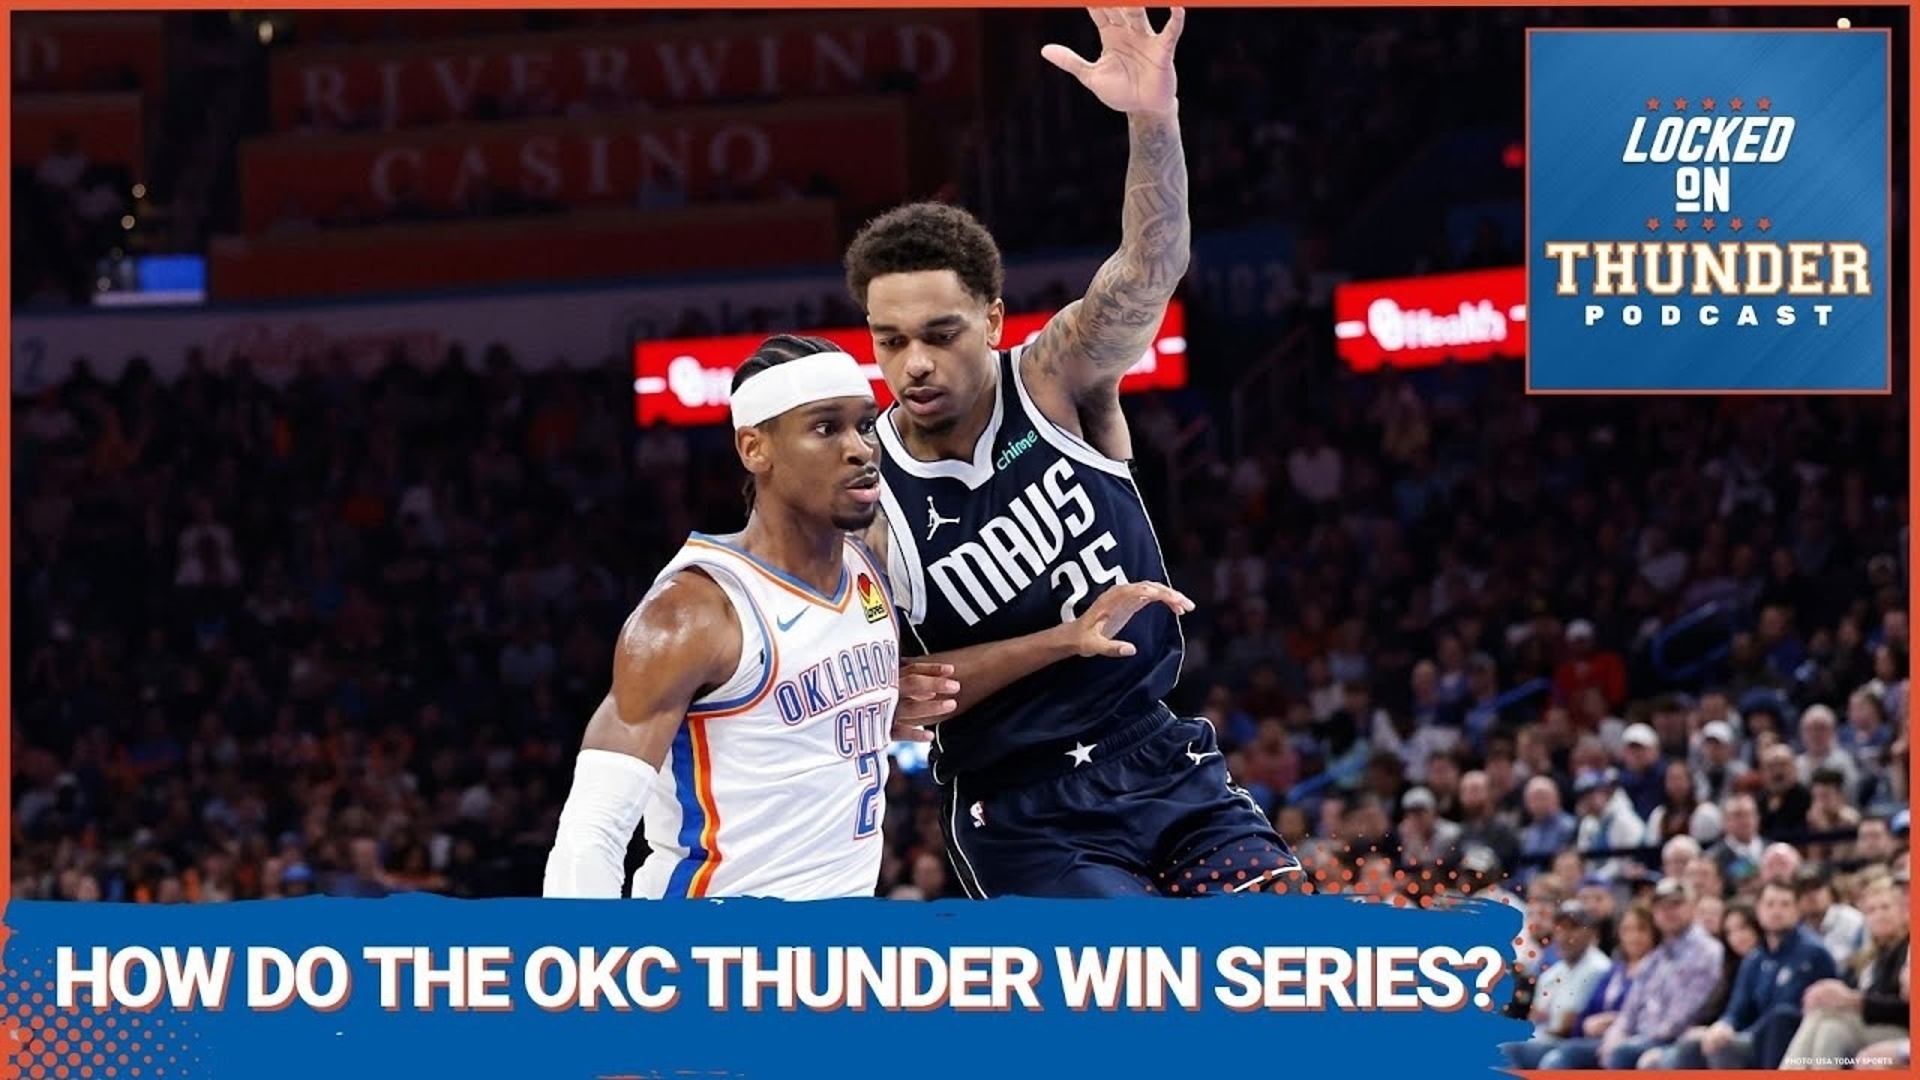 The Oklahoma City Thunder take on the Dallas Mavericks in Round 2 of the NBA Playoffs. How can the OKC Thunder knock off the Dallas Mavericks?